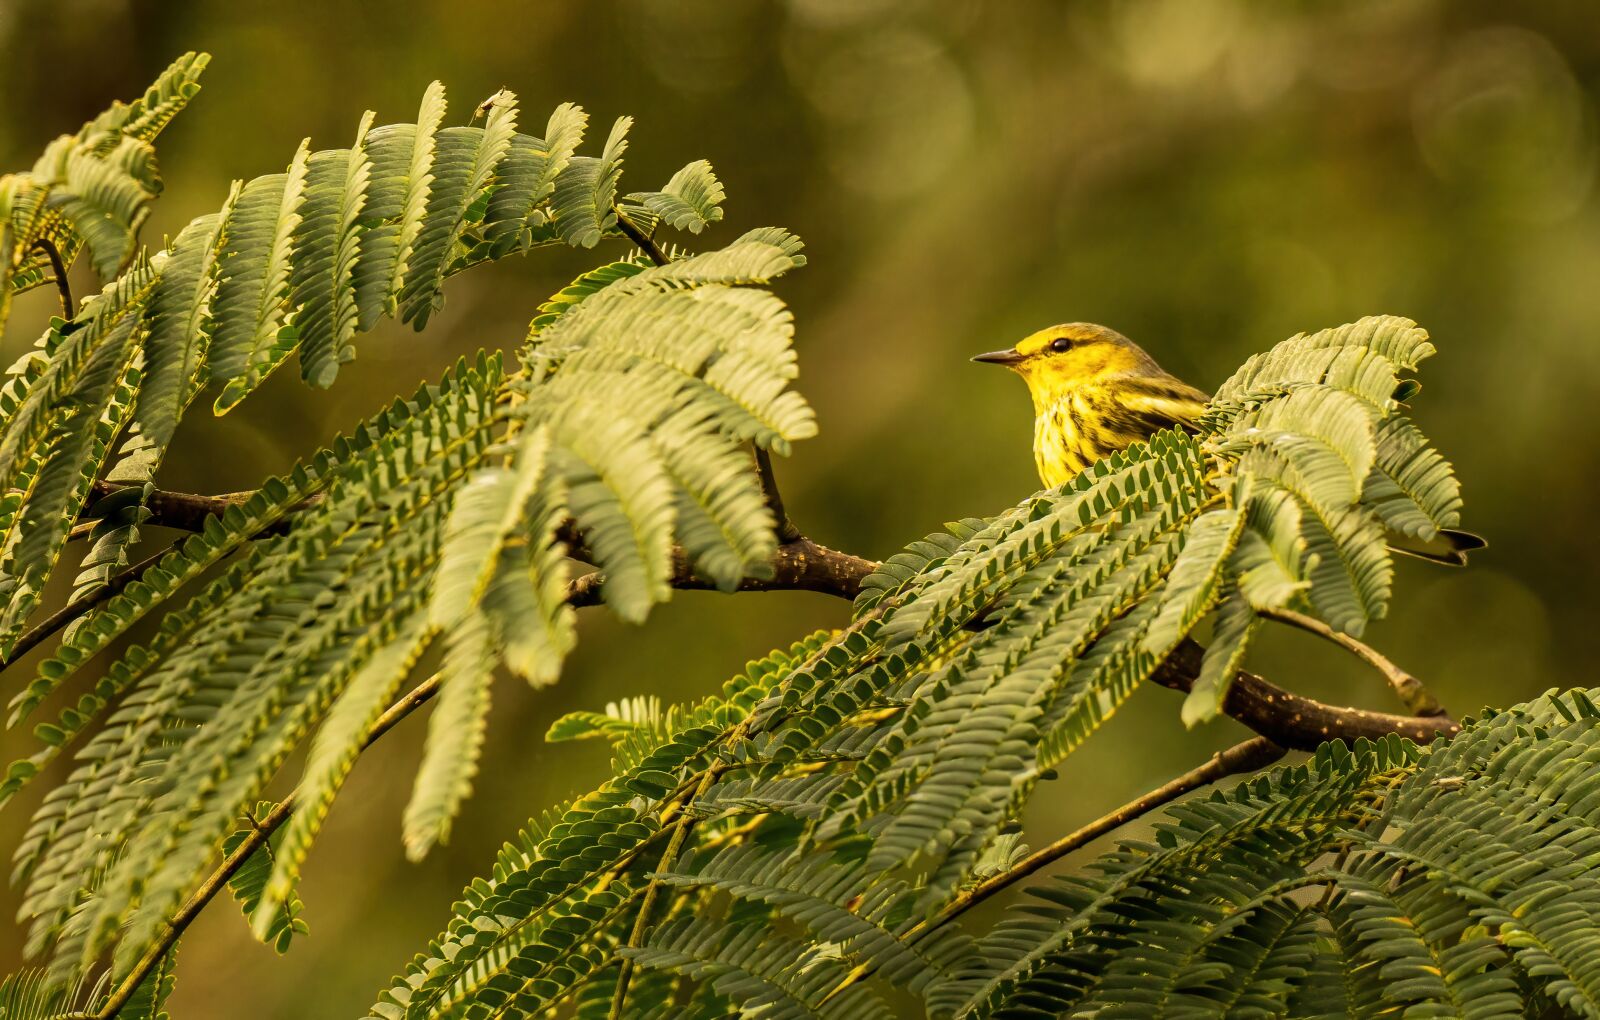 Sony a6400 sample photo. "Cape may warbler, warbler" photography